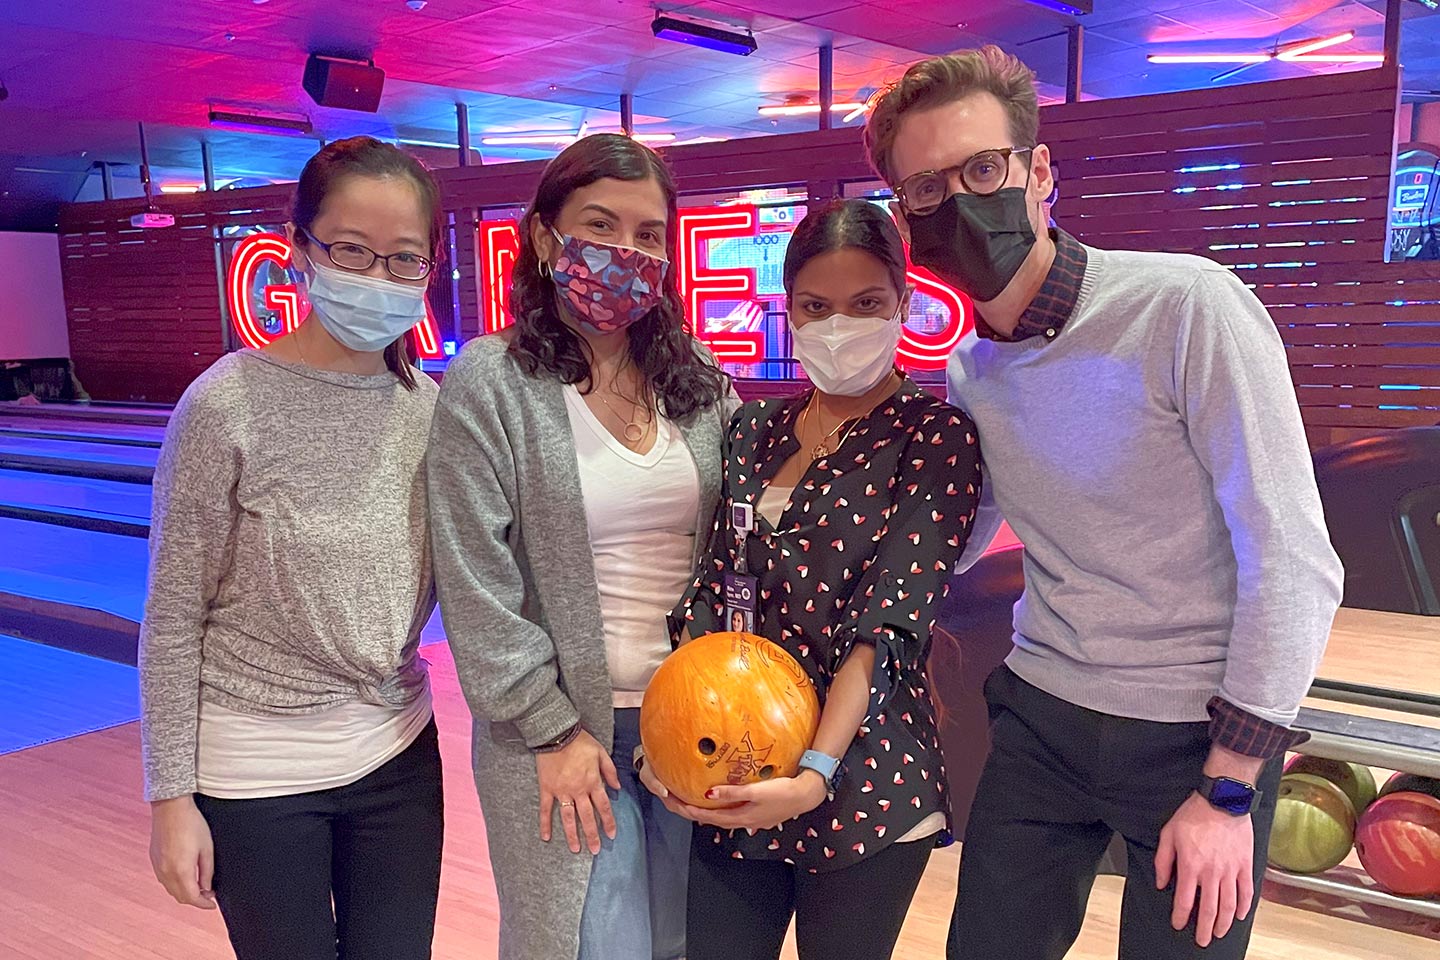 Four fellows wearing face masks and posing with a bowling ball in bowling alley